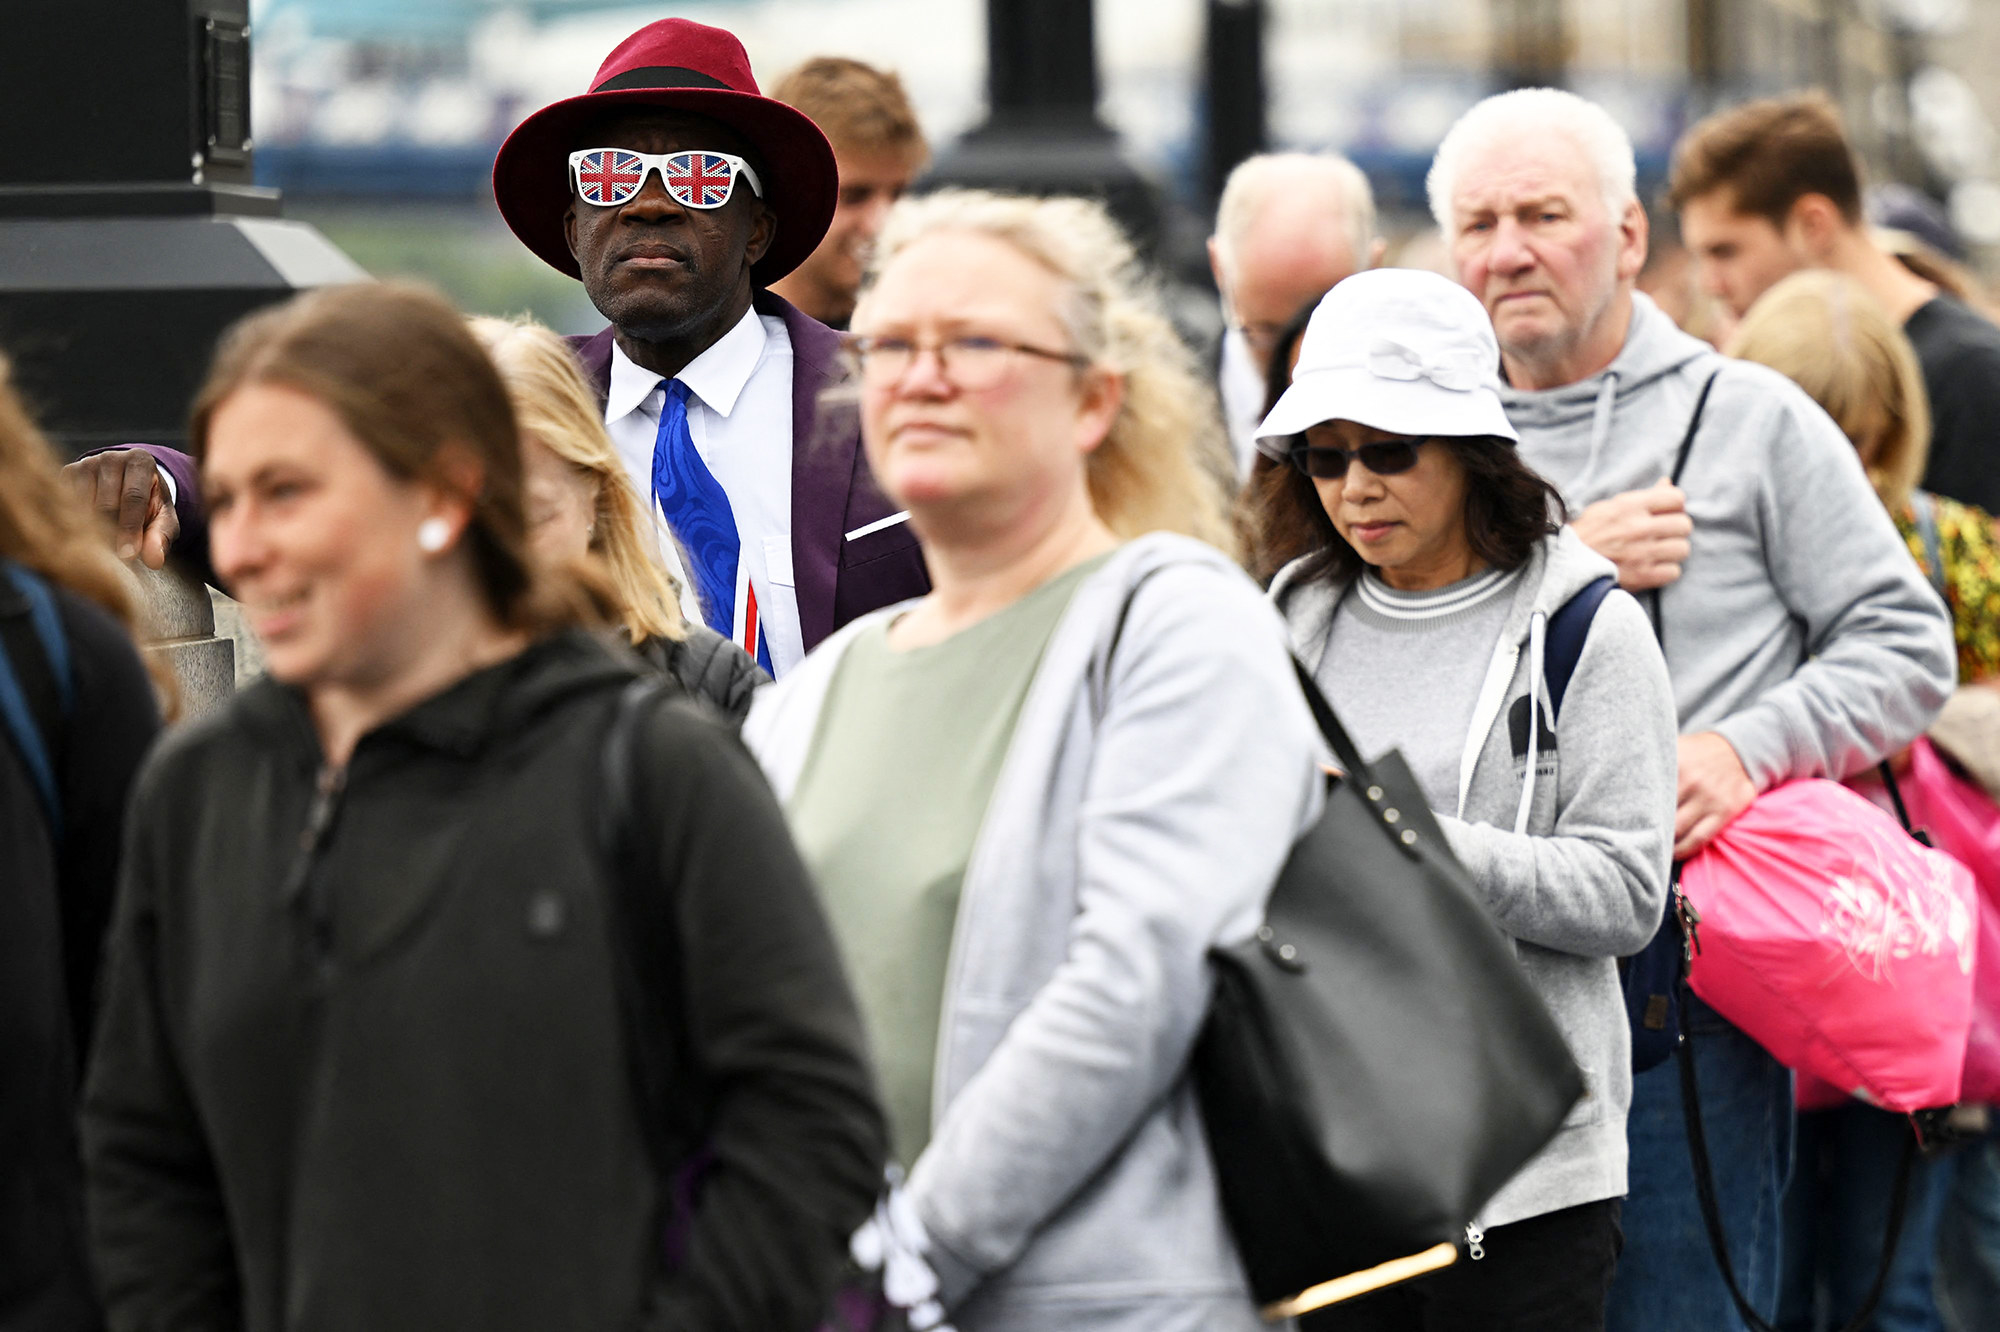 Man wearing a hat and Union Jack sunglasses waits in a crowd